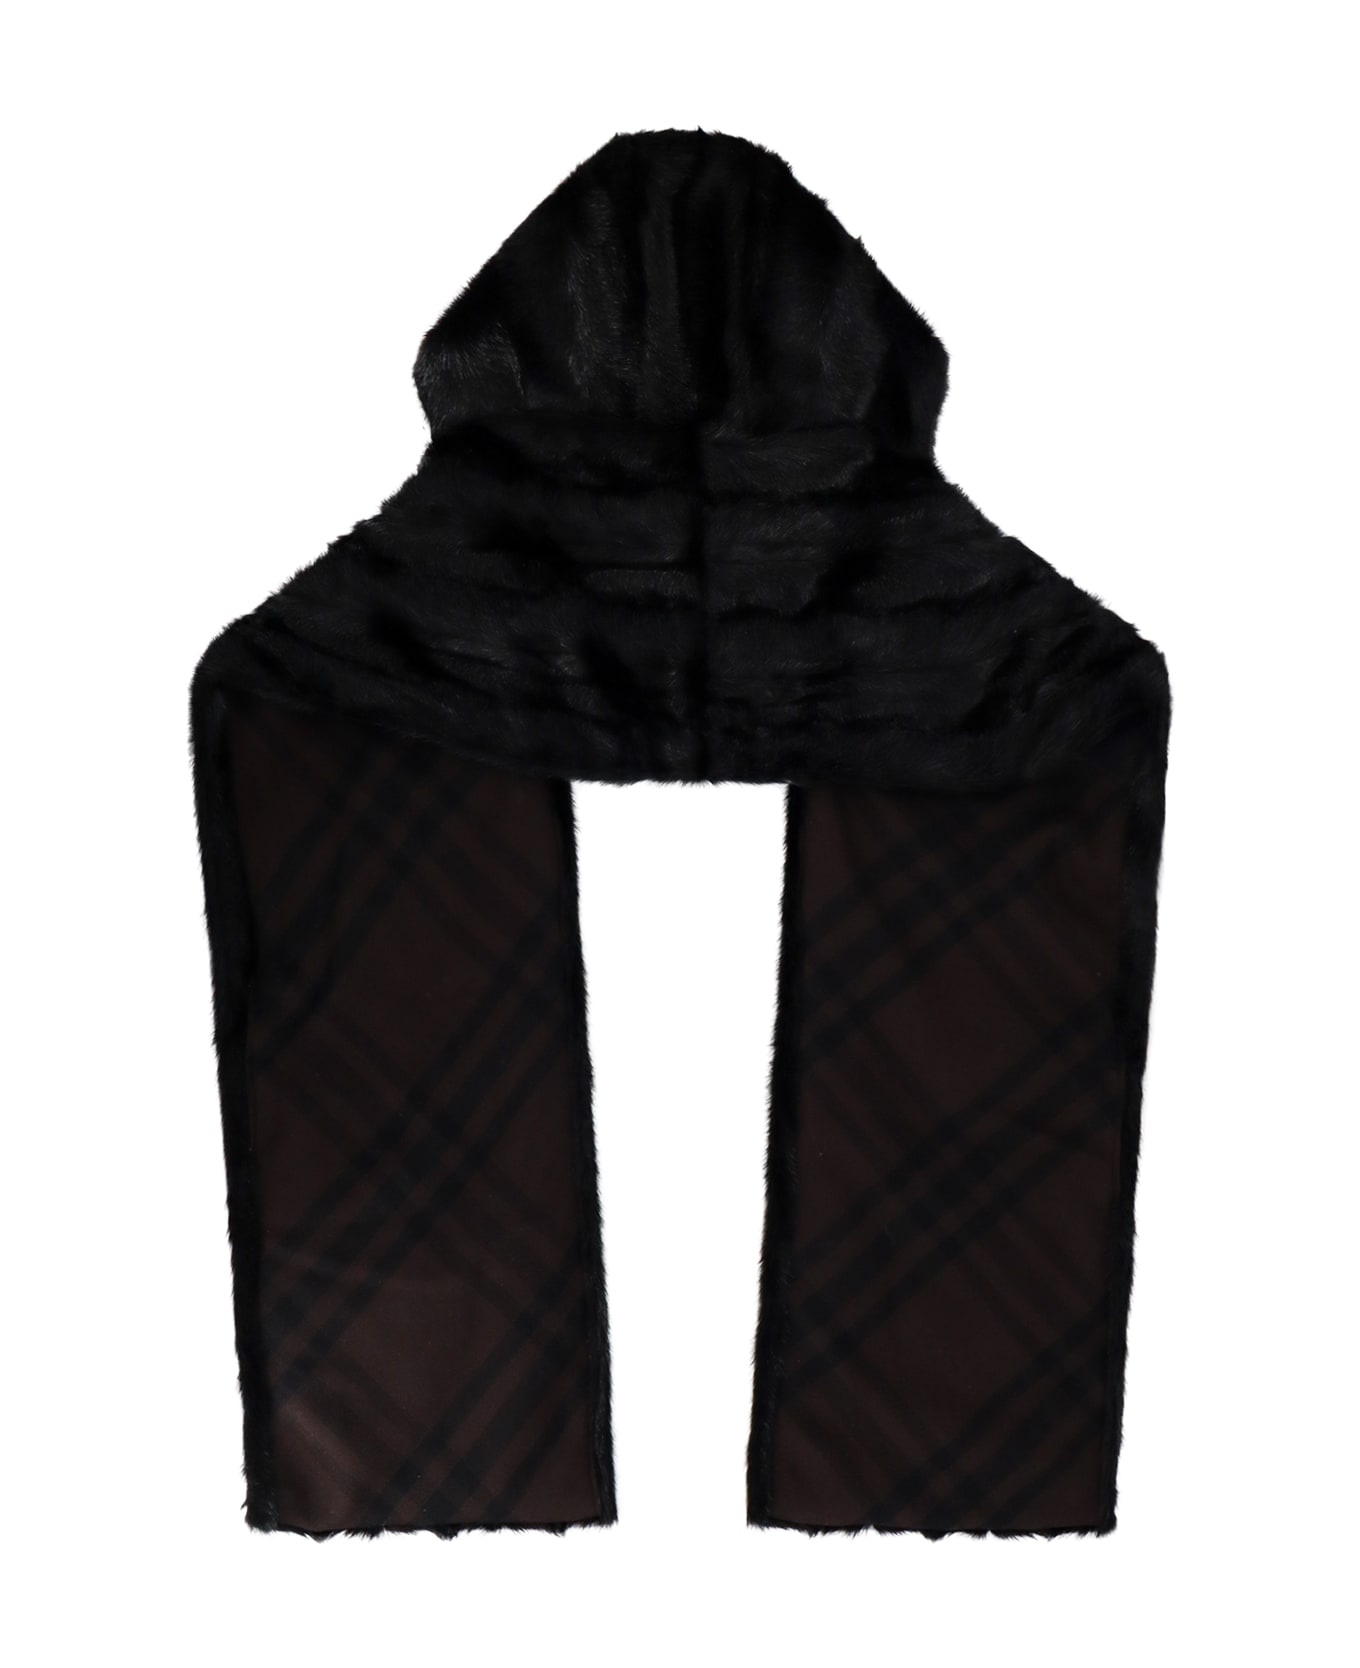 Burberry Black Scarf With Faux Fur Hood - Black